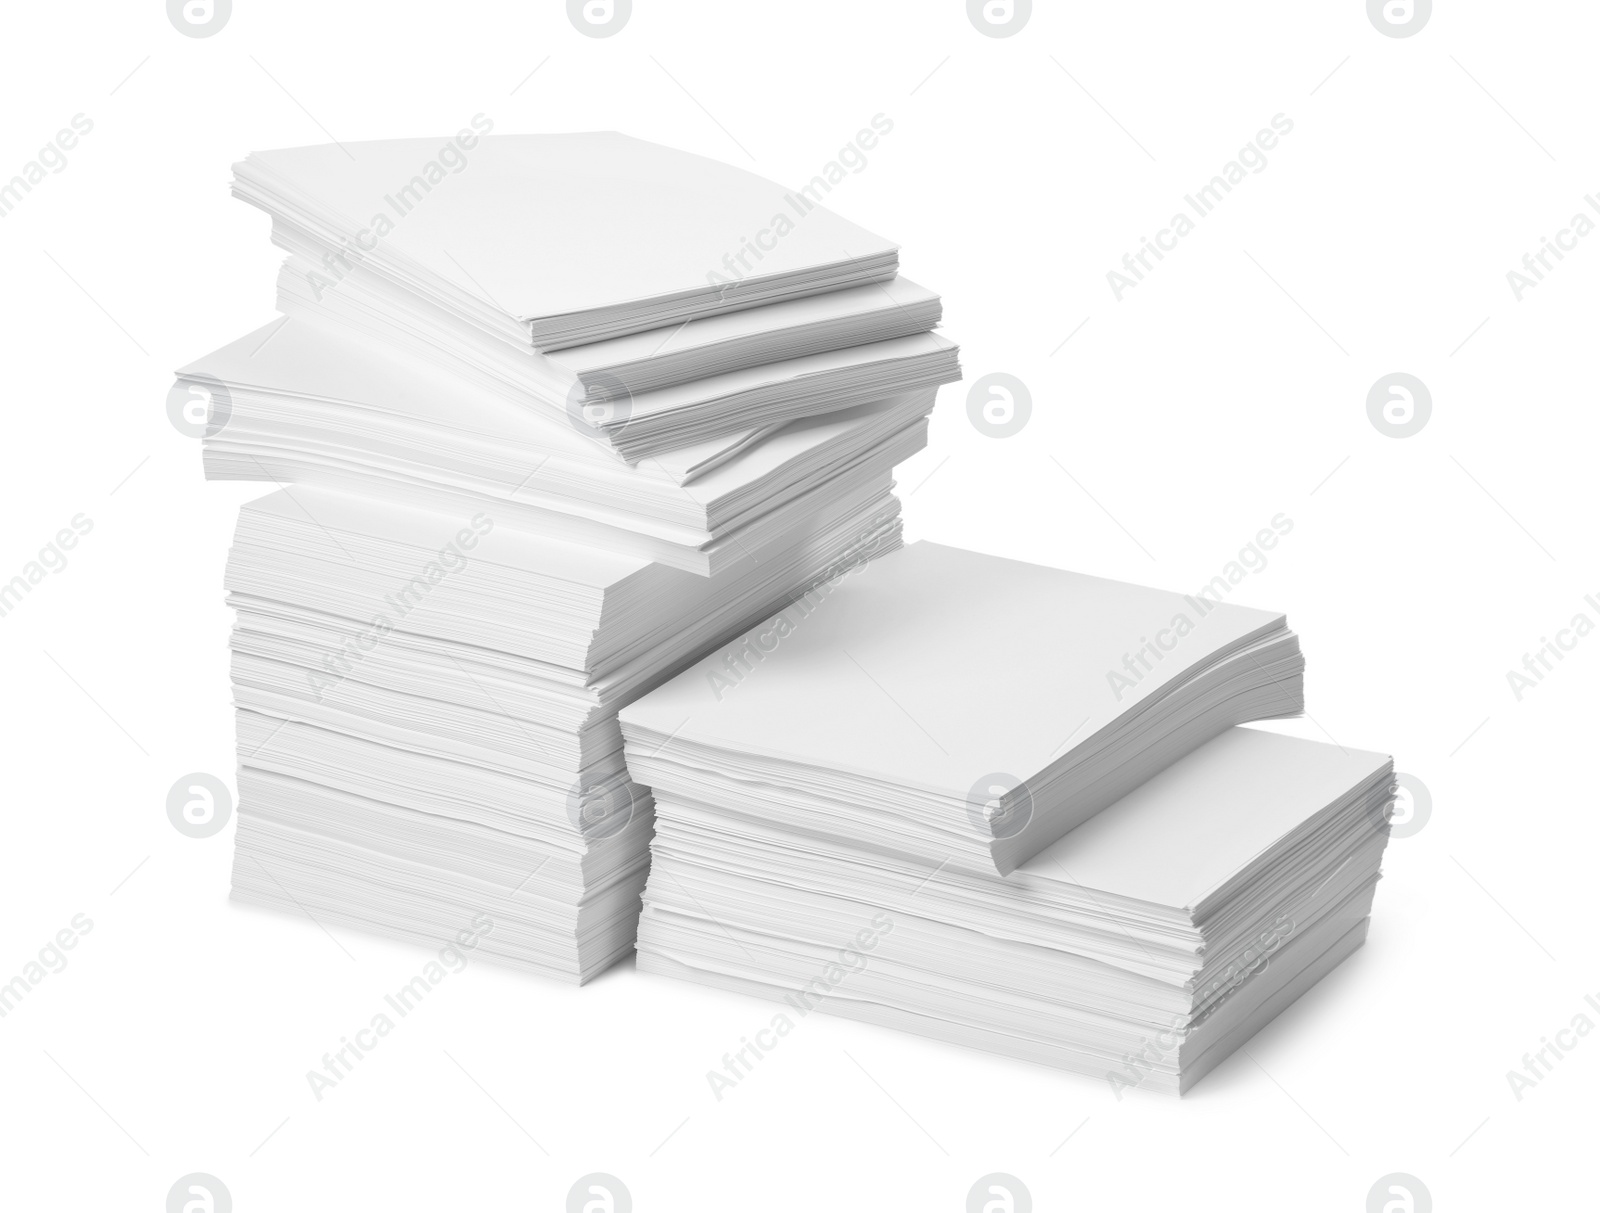 Photo of Stacks of paper sheets on white background